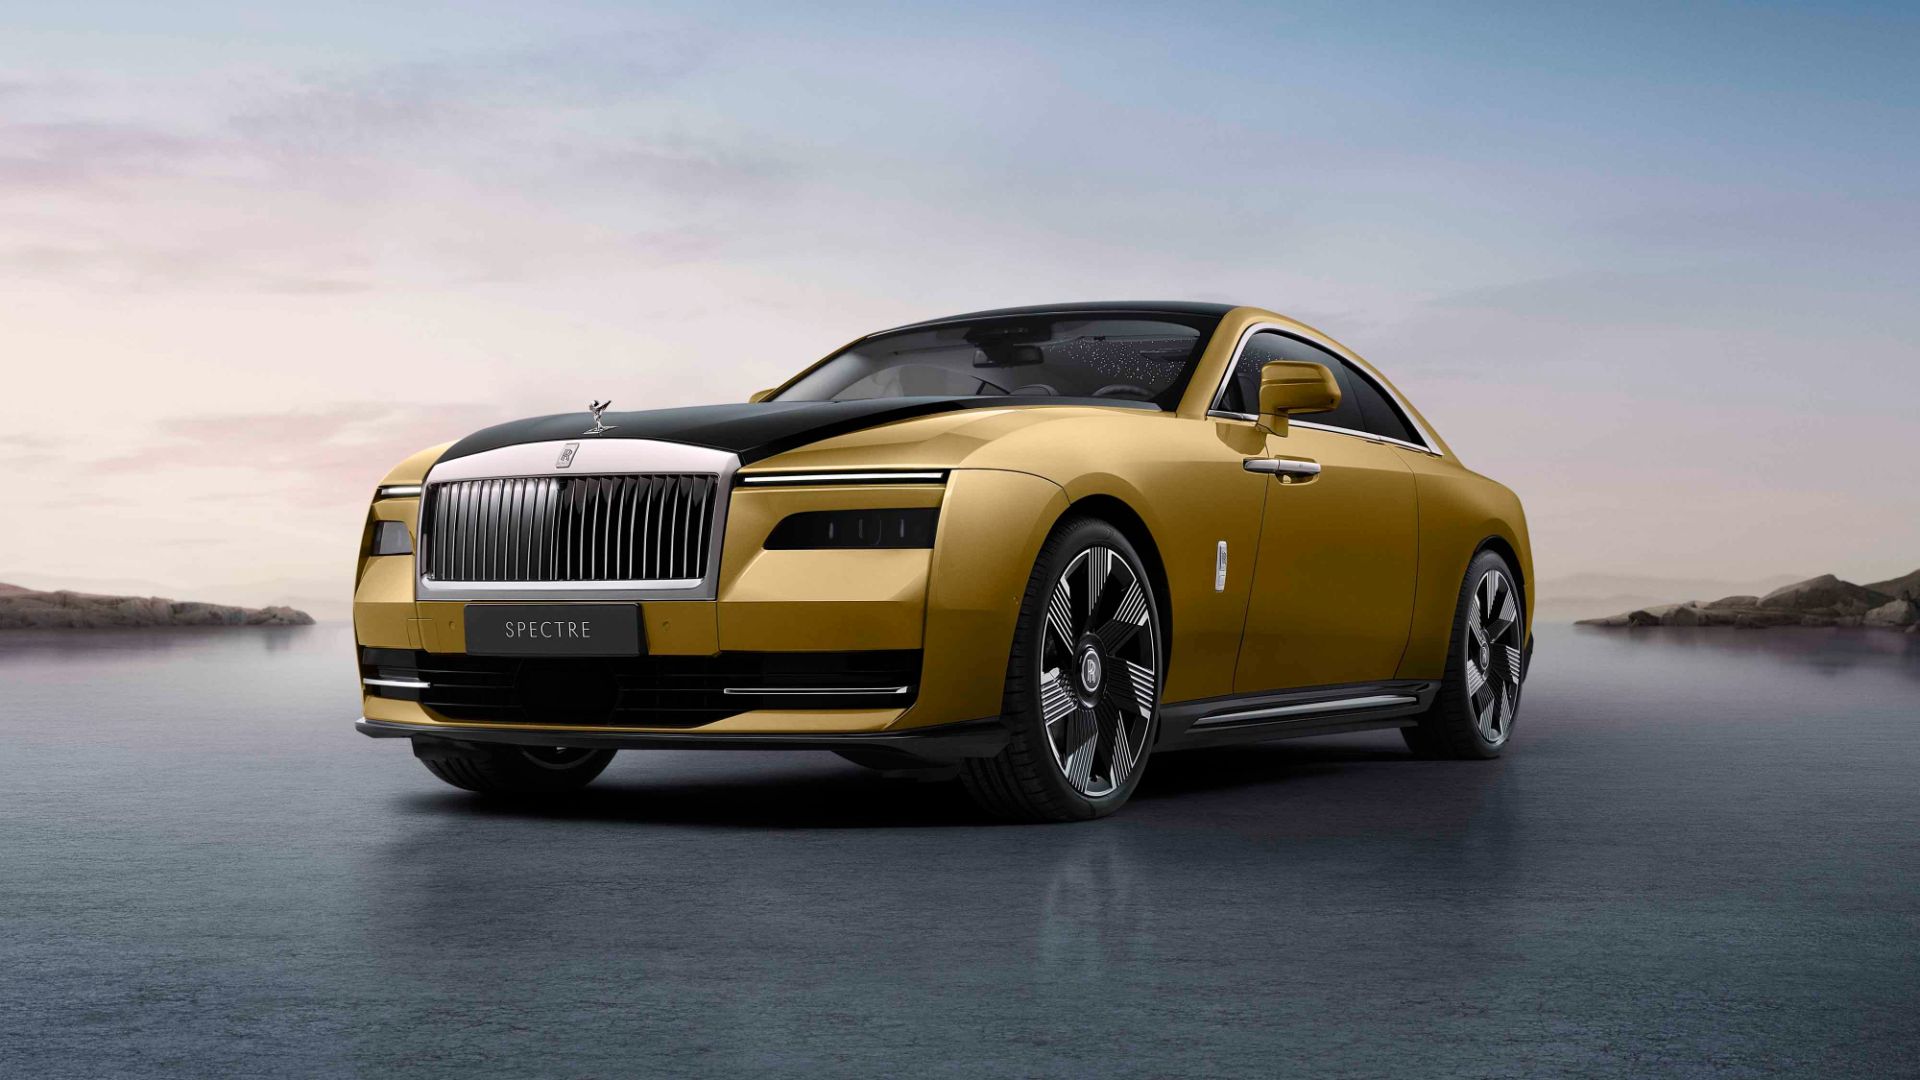 New RollsRoyce Spectre is the world's most opulent electric car